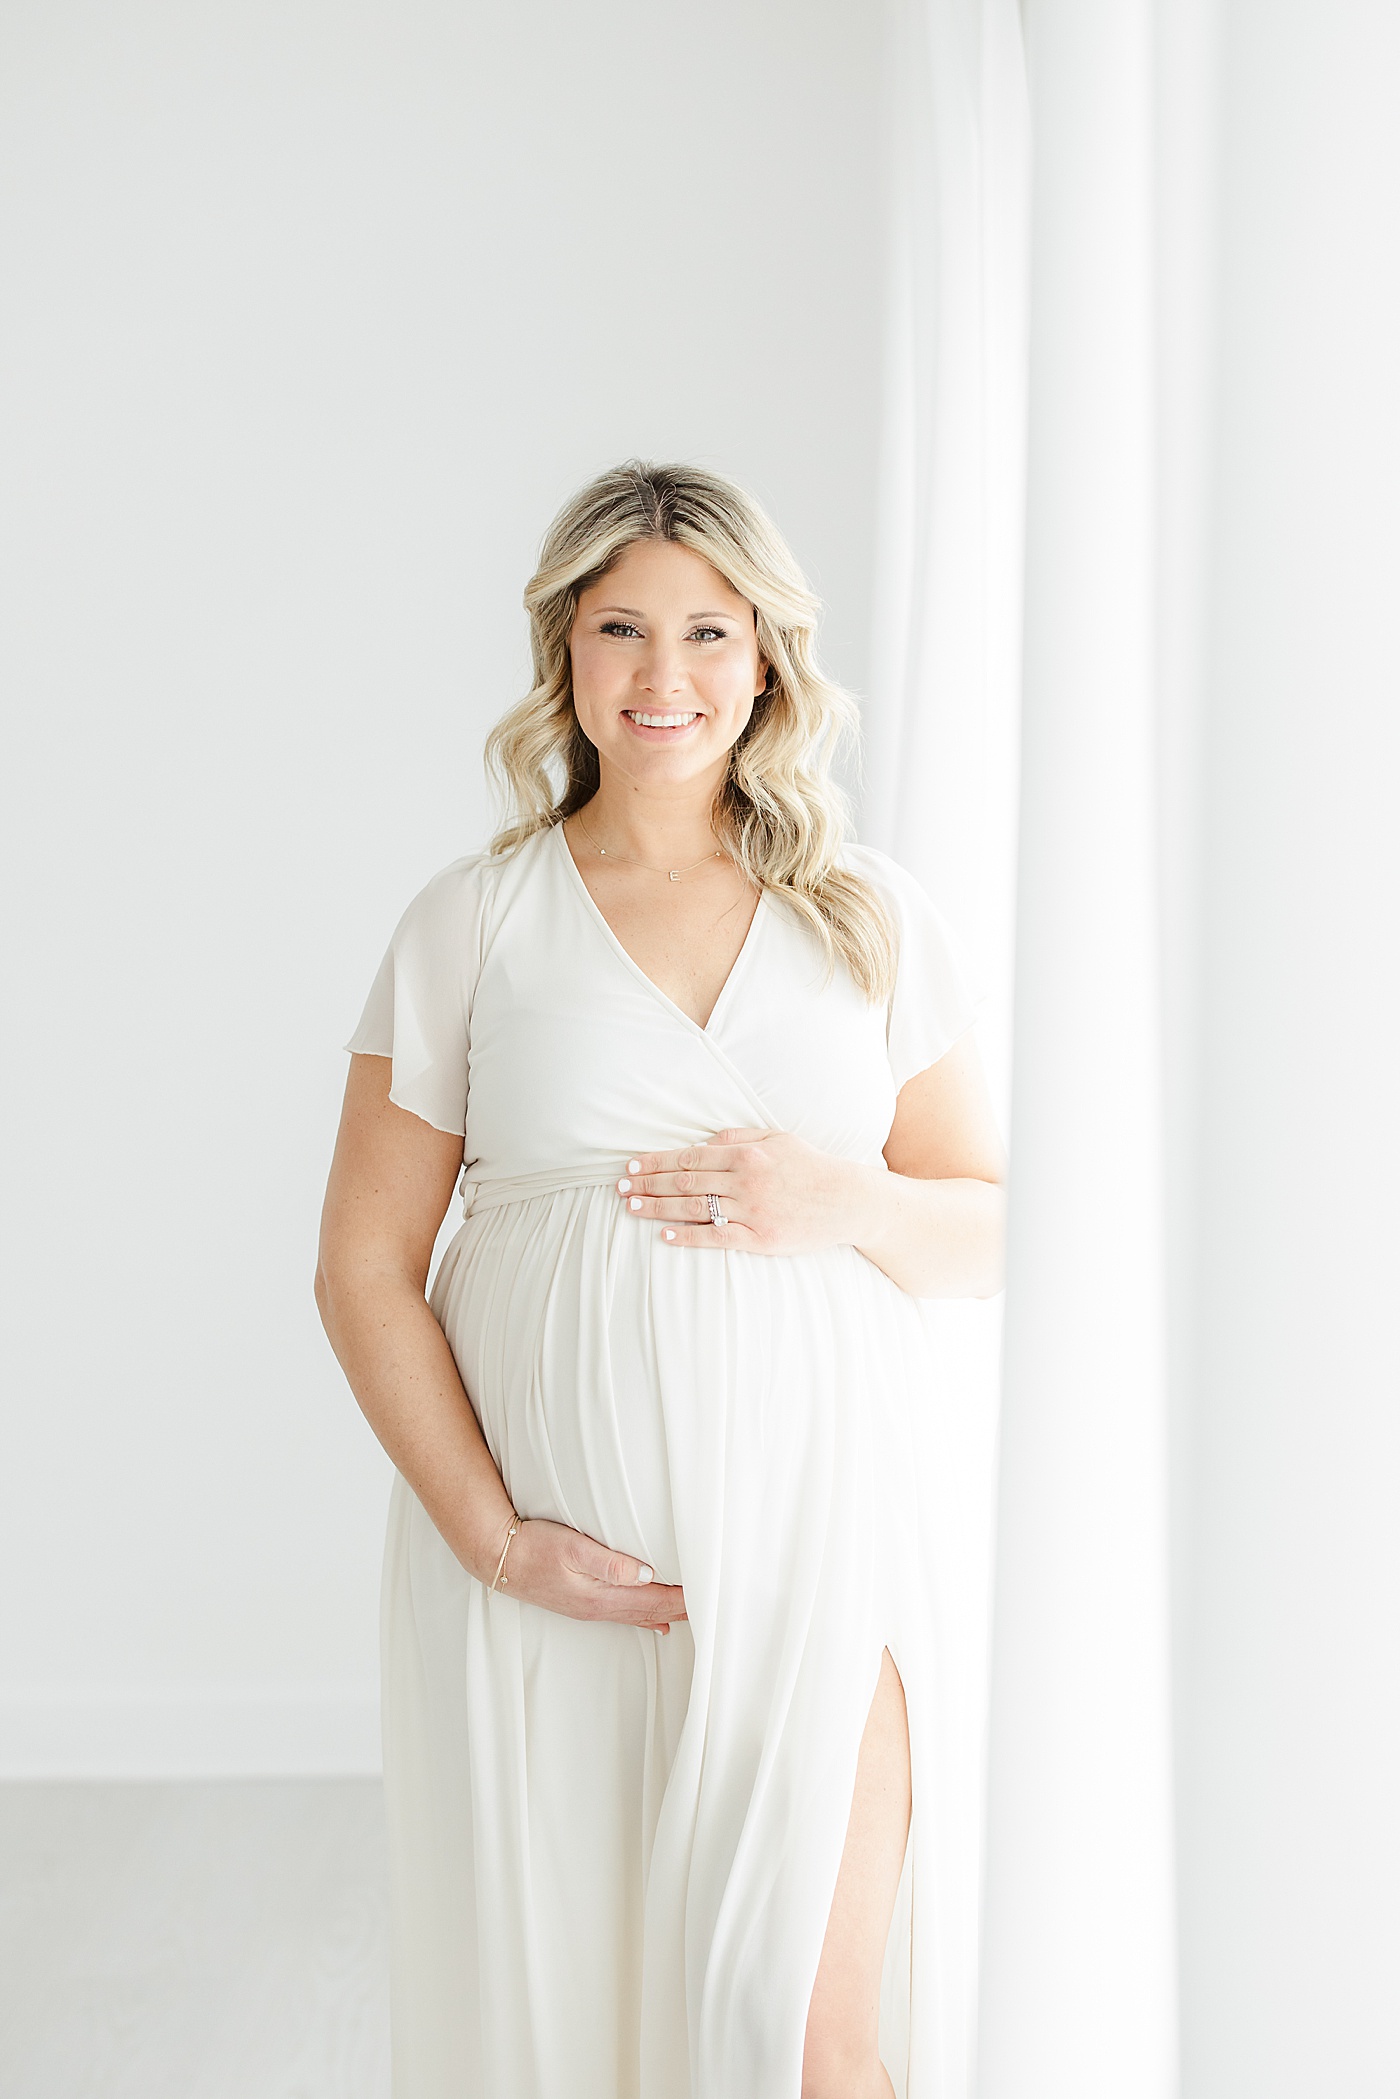 Studio maternity session for expecting mom in Westport, CT | Kristin Wood Photography